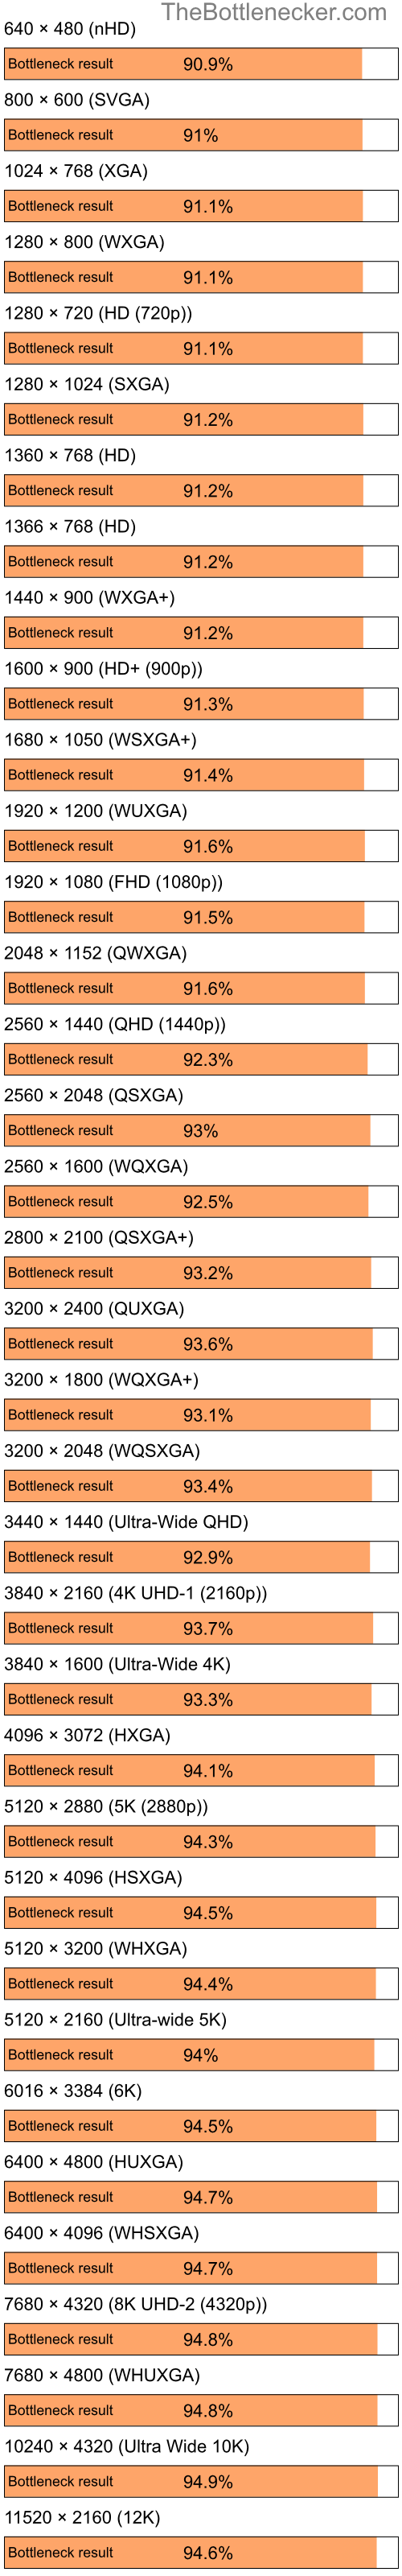 Bottleneck results by resolution for Intel Celeron and NVIDIA GeForce4 MX 440 in Graphic Card Intense Tasks